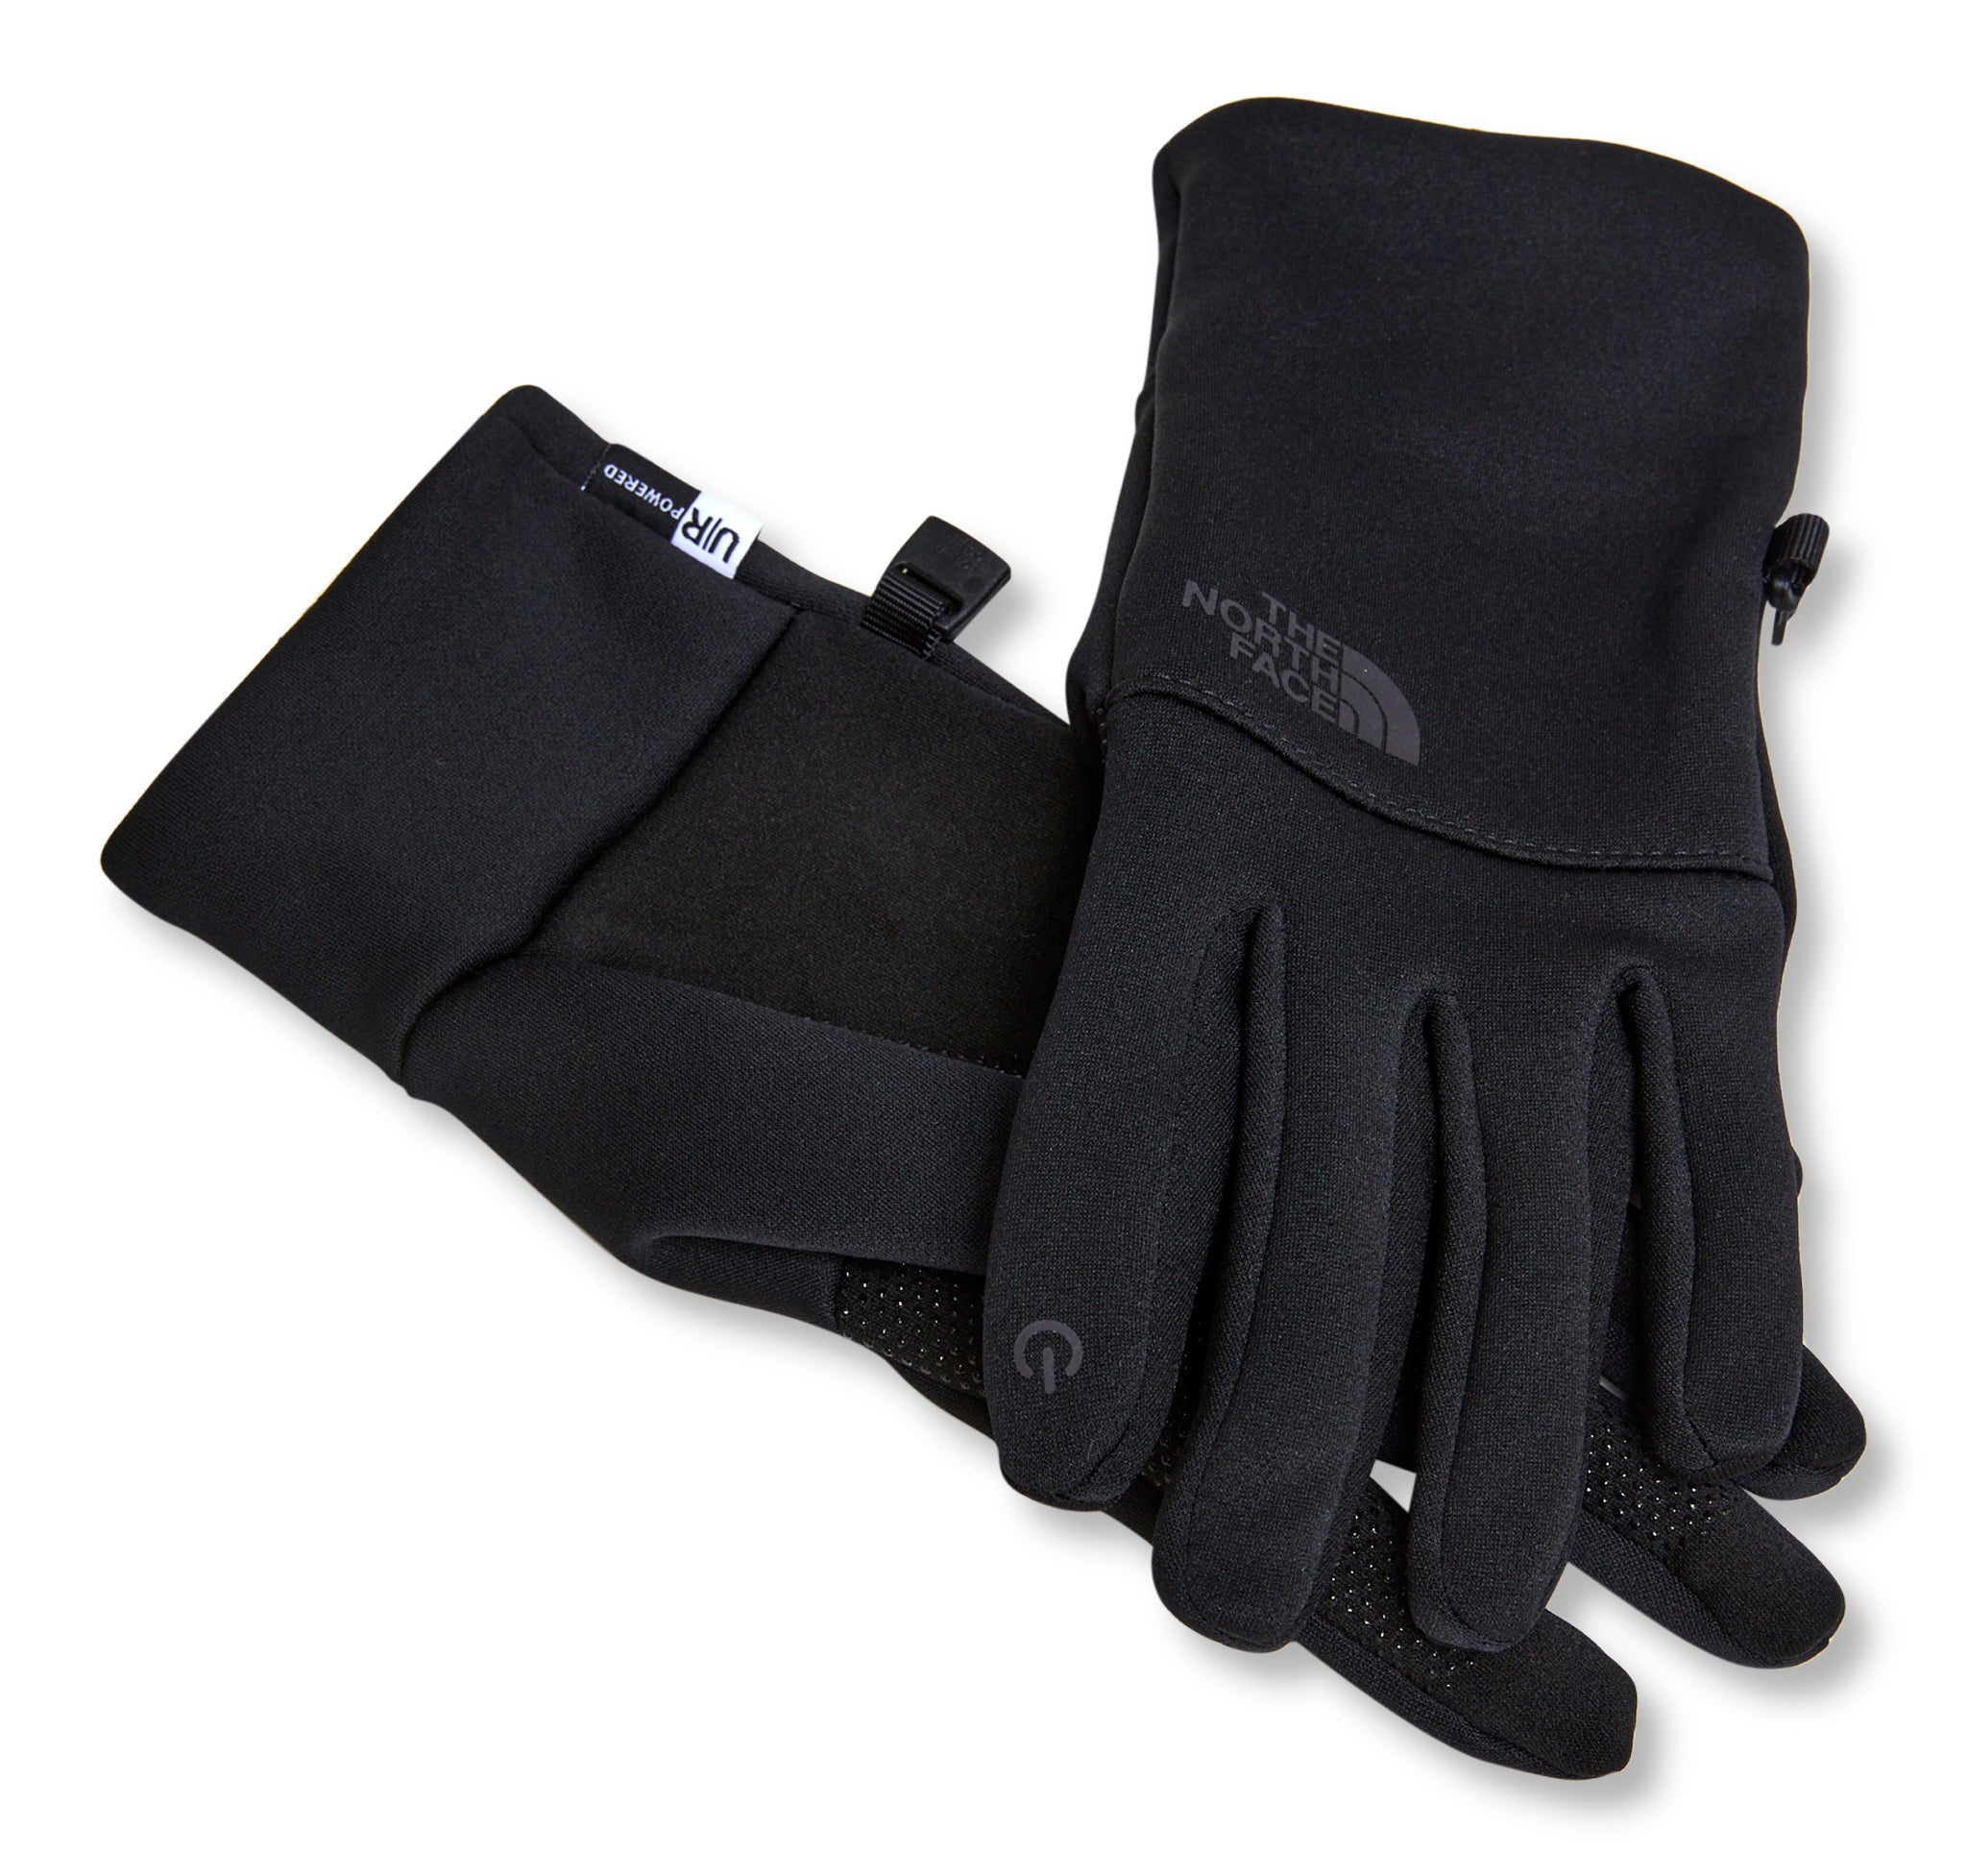 The North Face Etip Recycled Gloves - Unisex